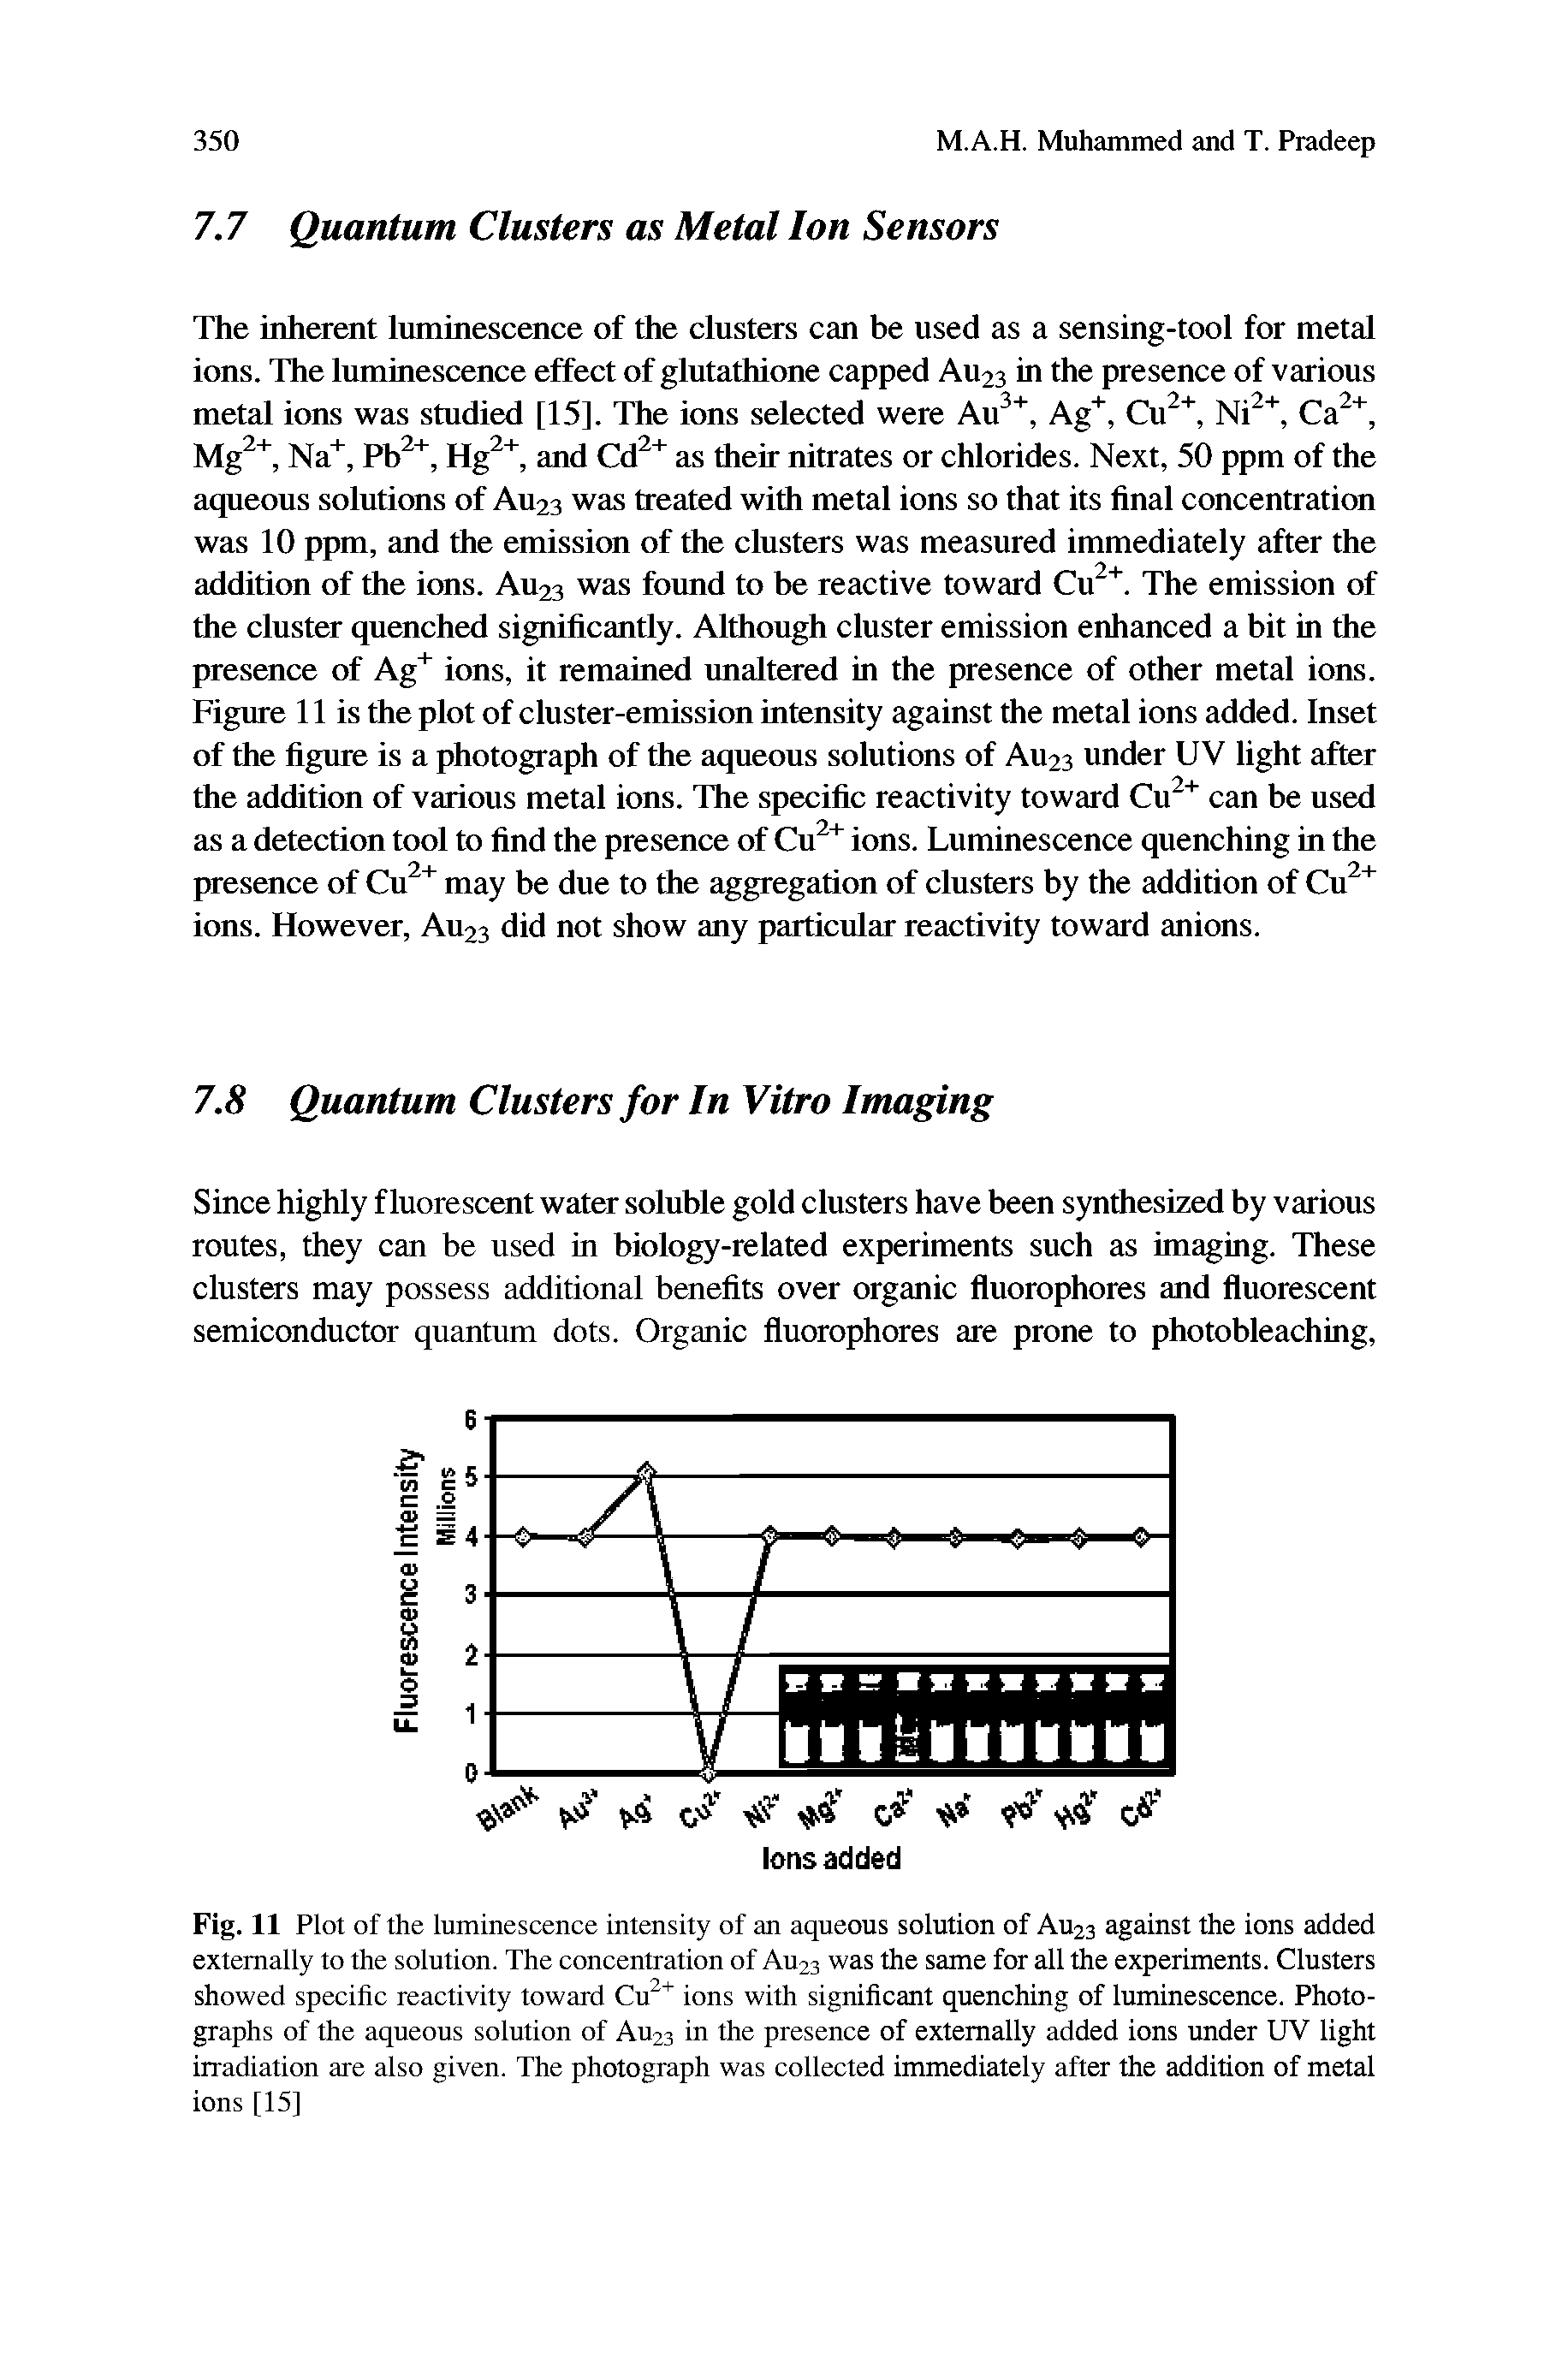 Fig. 11 Plot of the luminescence intensity of an aqueous solution of Au23 against the ions added externally to the solution. The concentration of Au23 was the same for all the experiments. Clusters showed specific reactivity toward Cu2+ ions with significant quenching of luminescence. Photographs of the aqueous solution of Au23 in the presence of externally added ions under UV light irradiation are also given. The photograph was collected immediately after the addition of metal ions [15]...